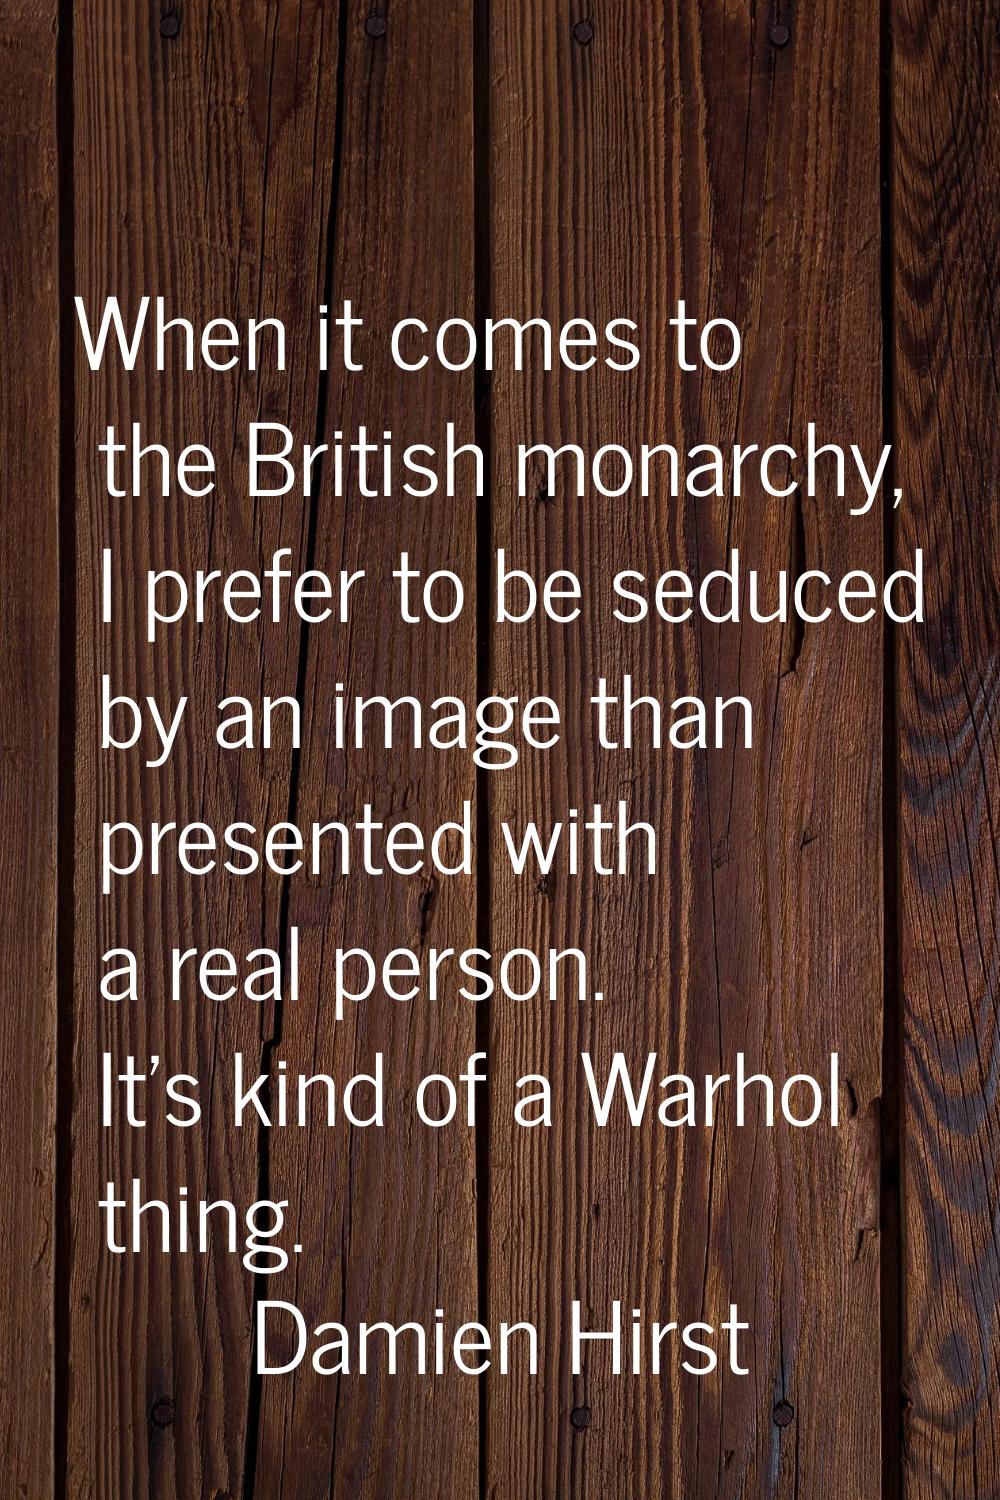 When it comes to the British monarchy, I prefer to be seduced by an image than presented with a rea